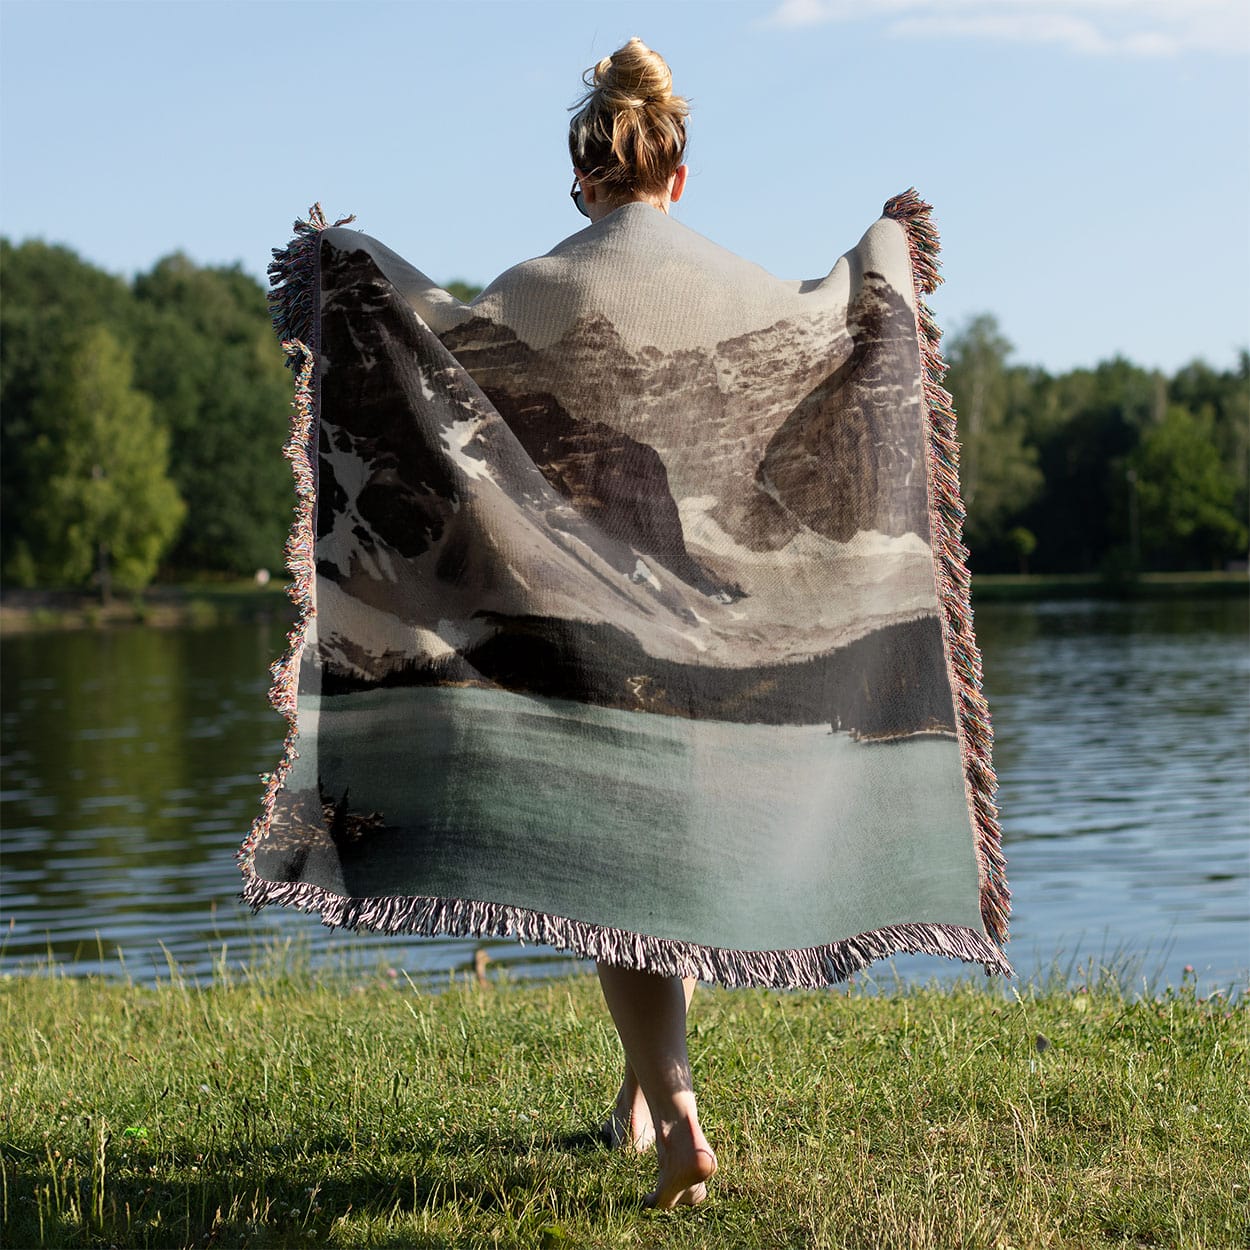 Banff National Park Woven Blanket Held on a Woman's Back Outside